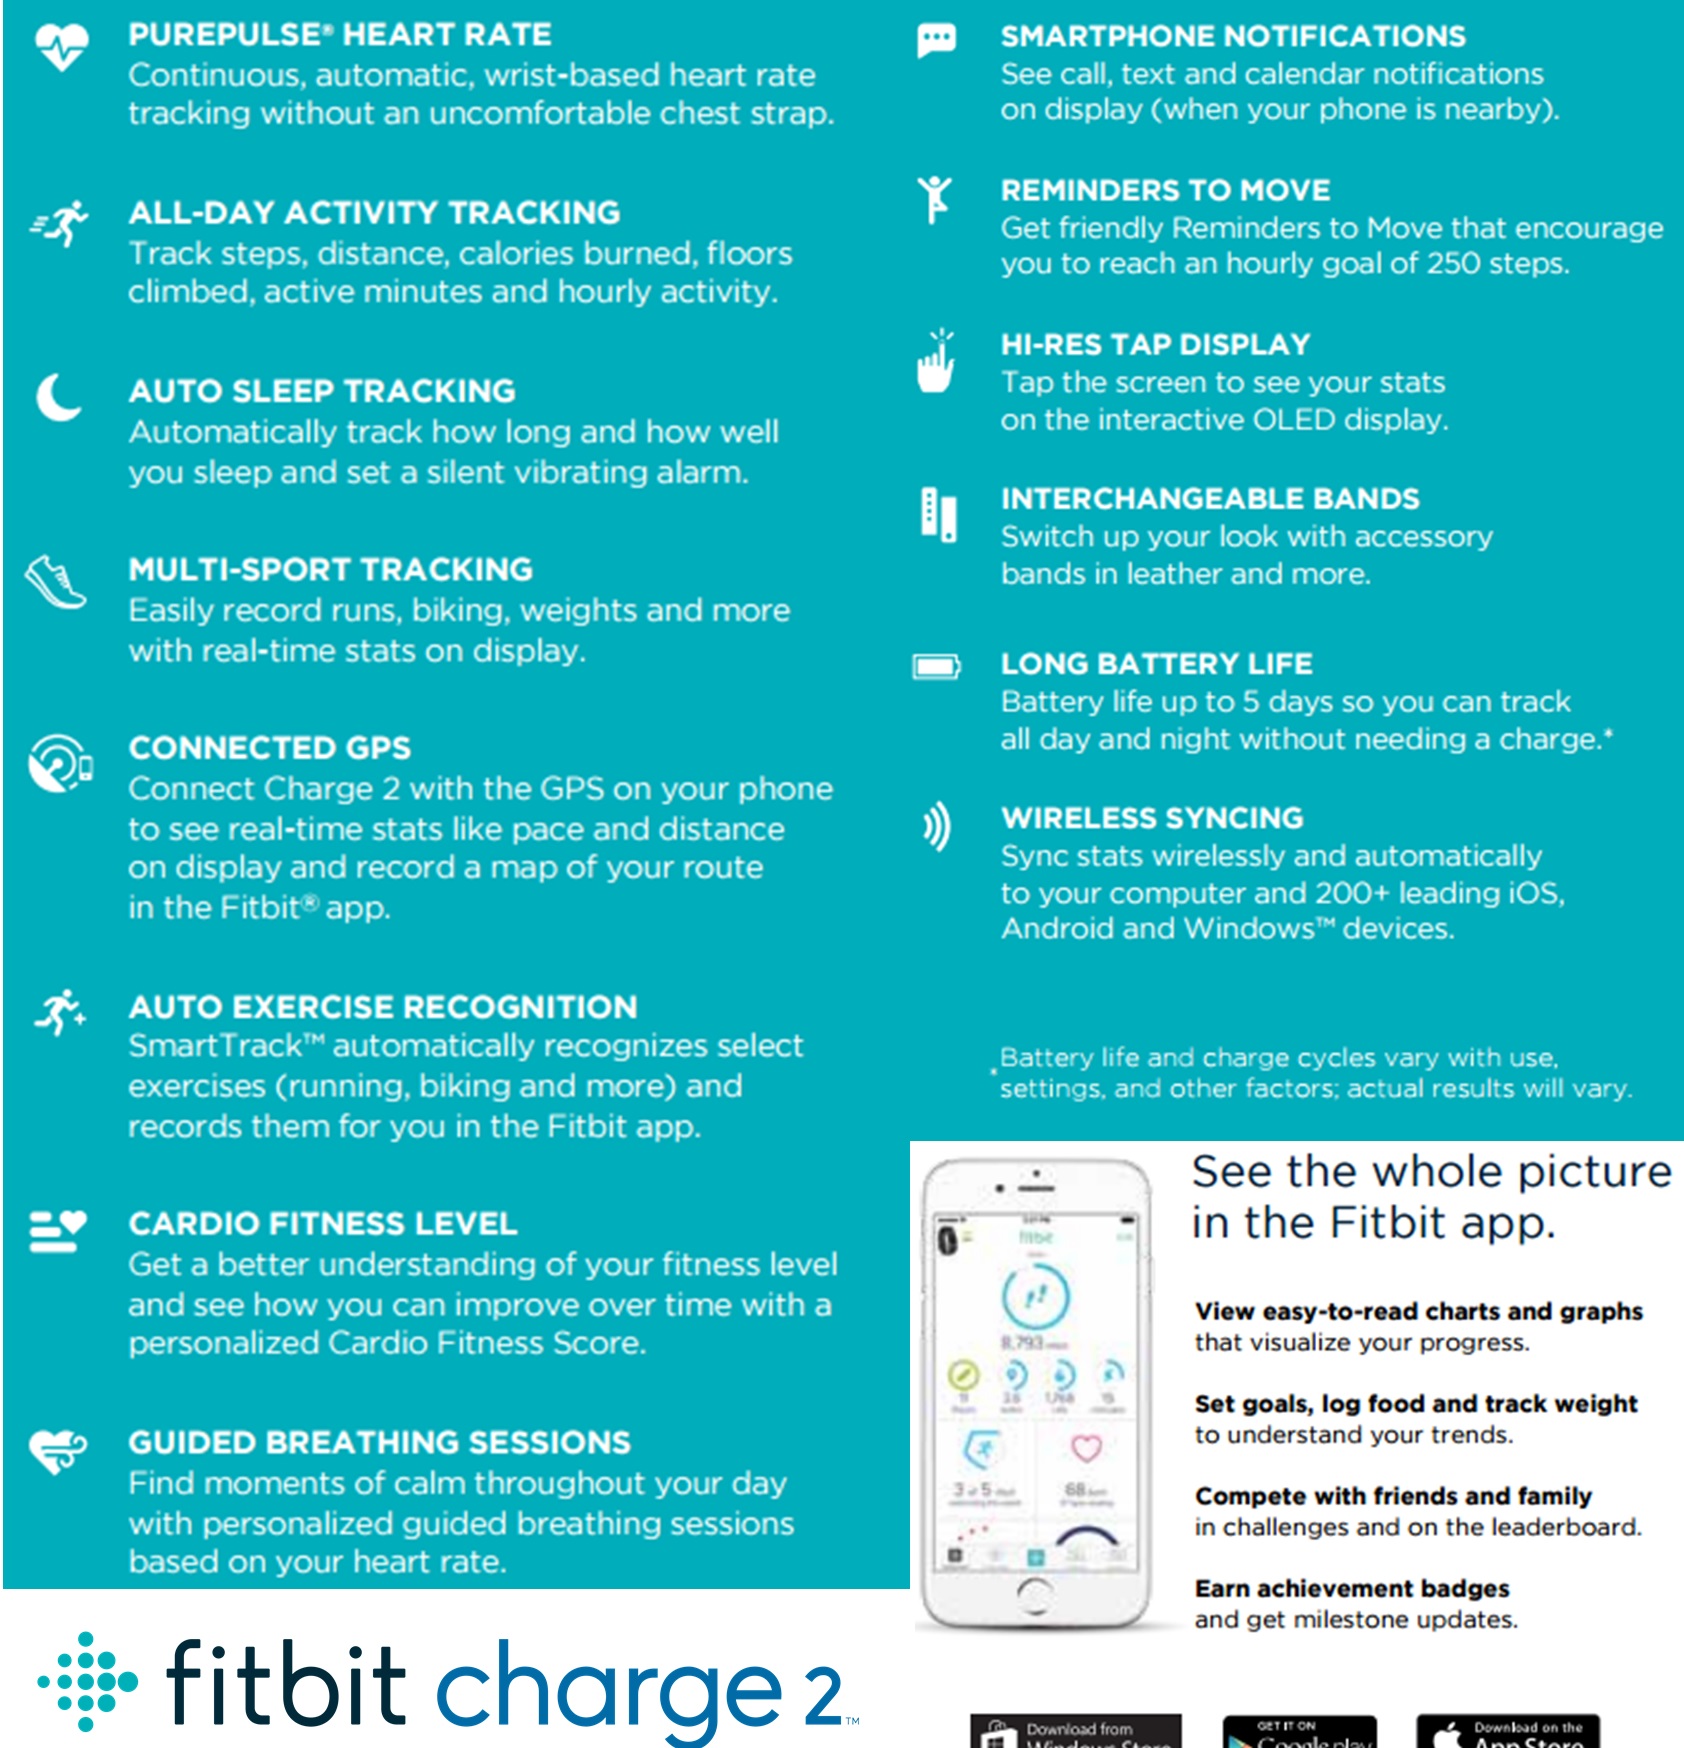 fitbit-charge-2-review-details Sweet Life Fitness